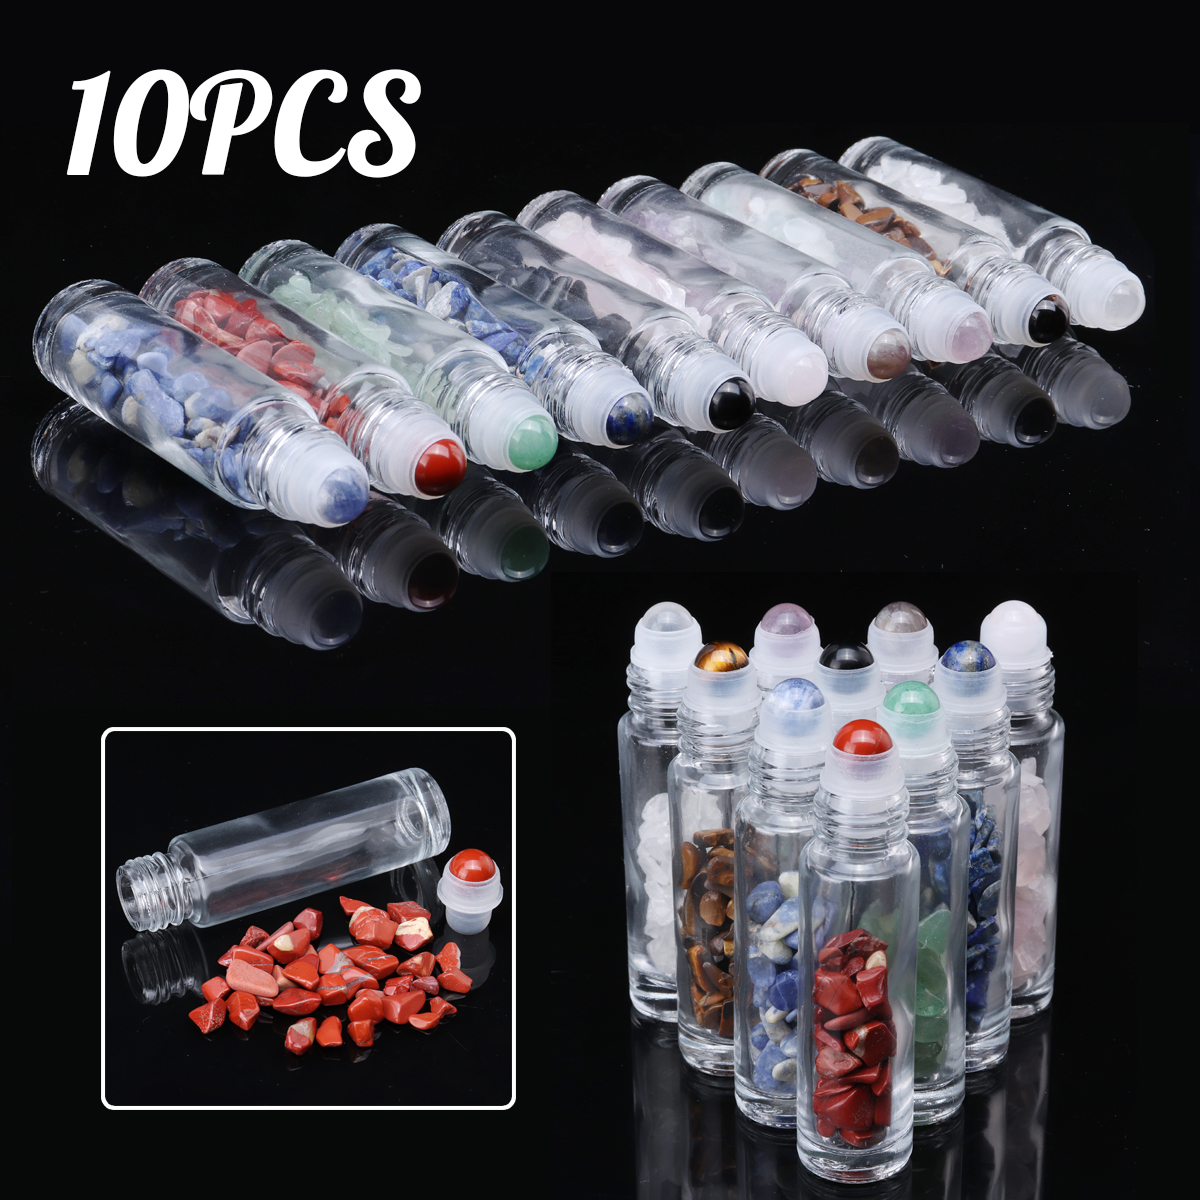 

10pcs 10ml Essential Oil Gemstone Roller Ball Bottle Glass with Natural